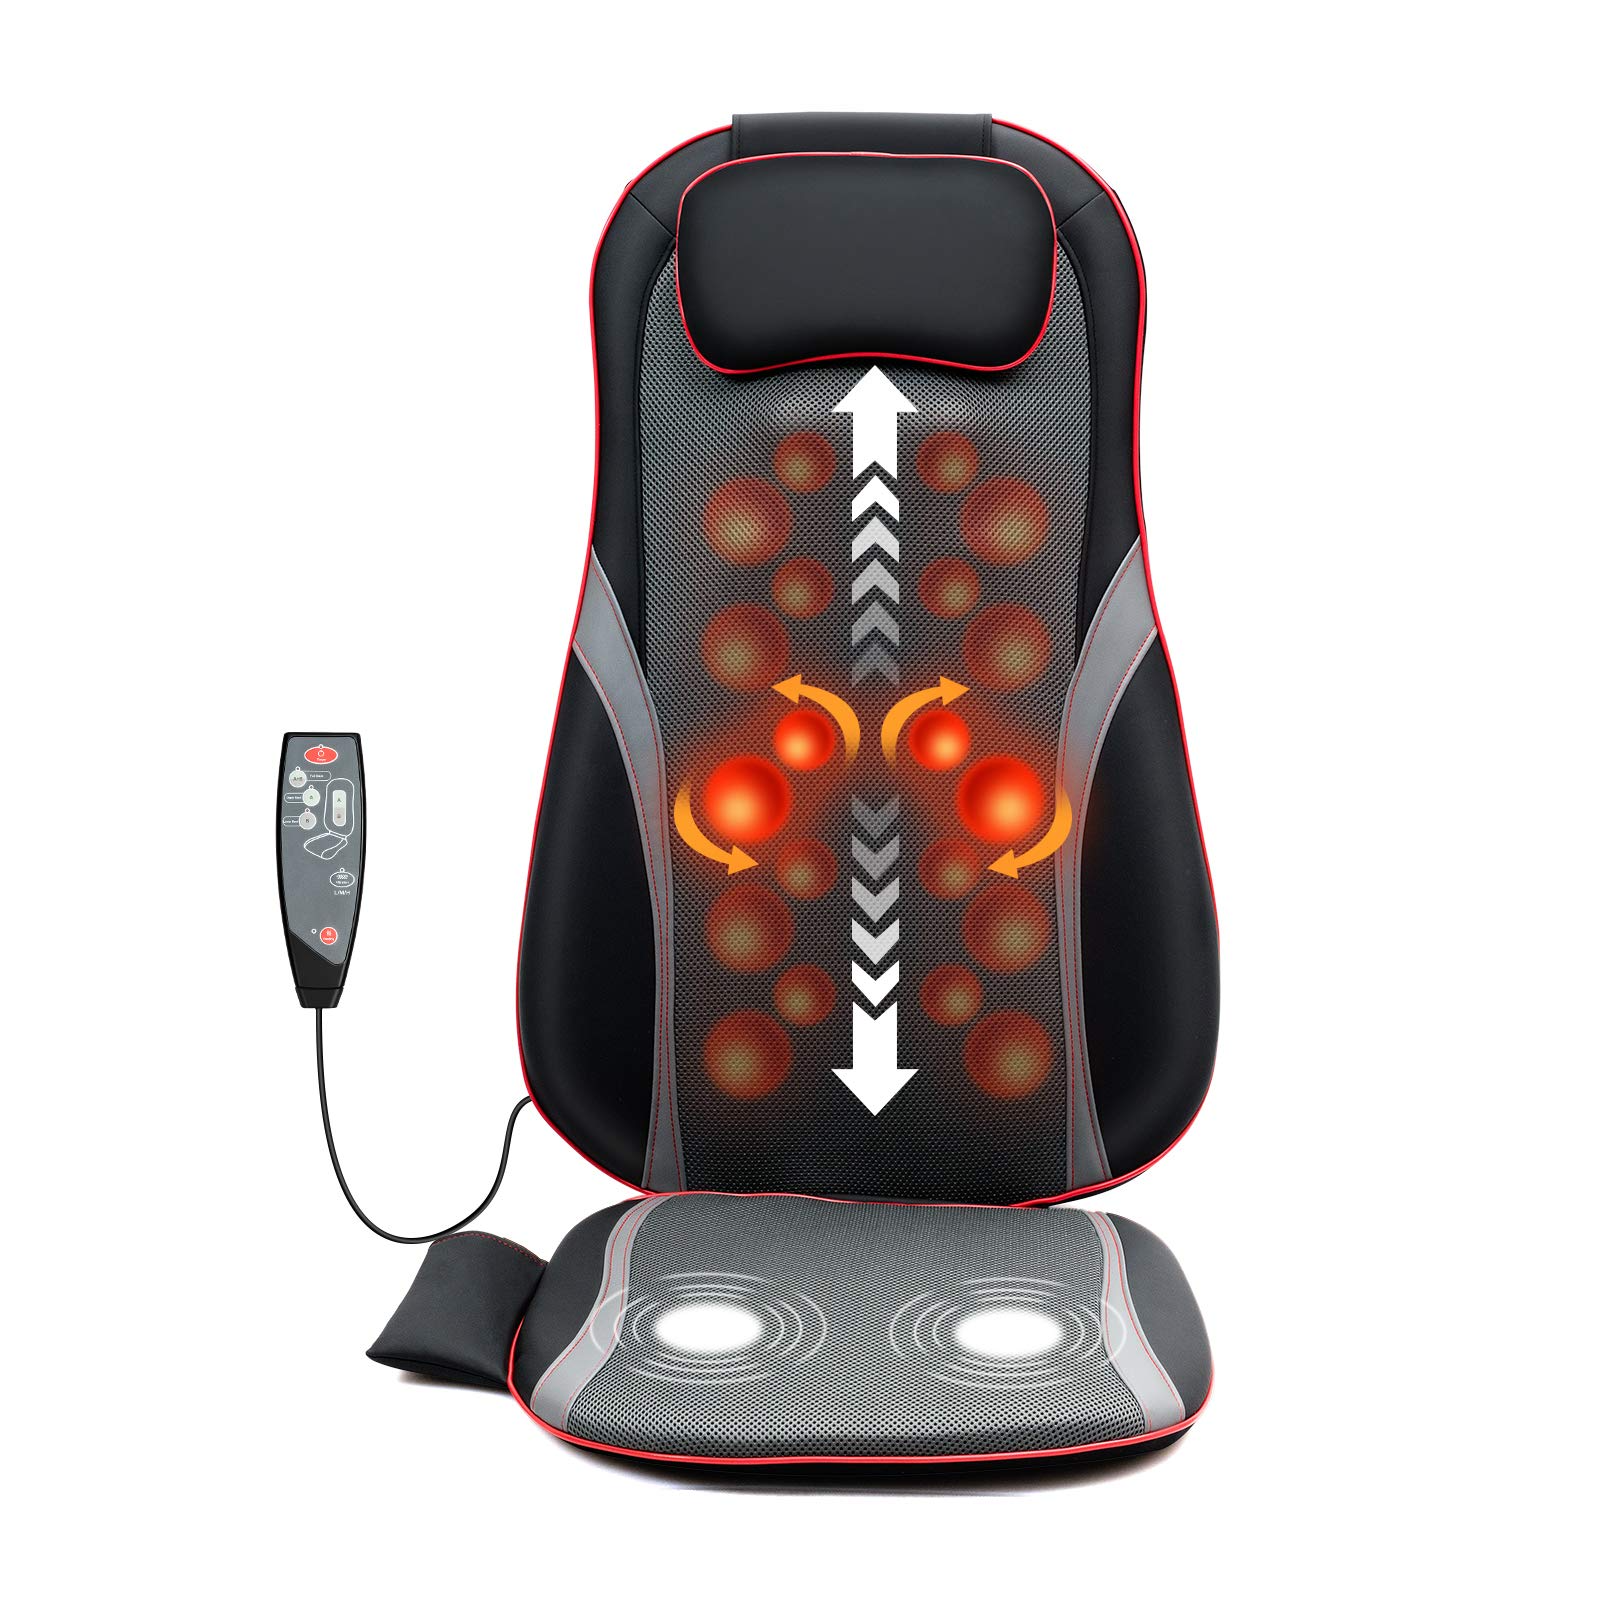 Giantex Massage Seat Cushion for Home and Office Chair Use